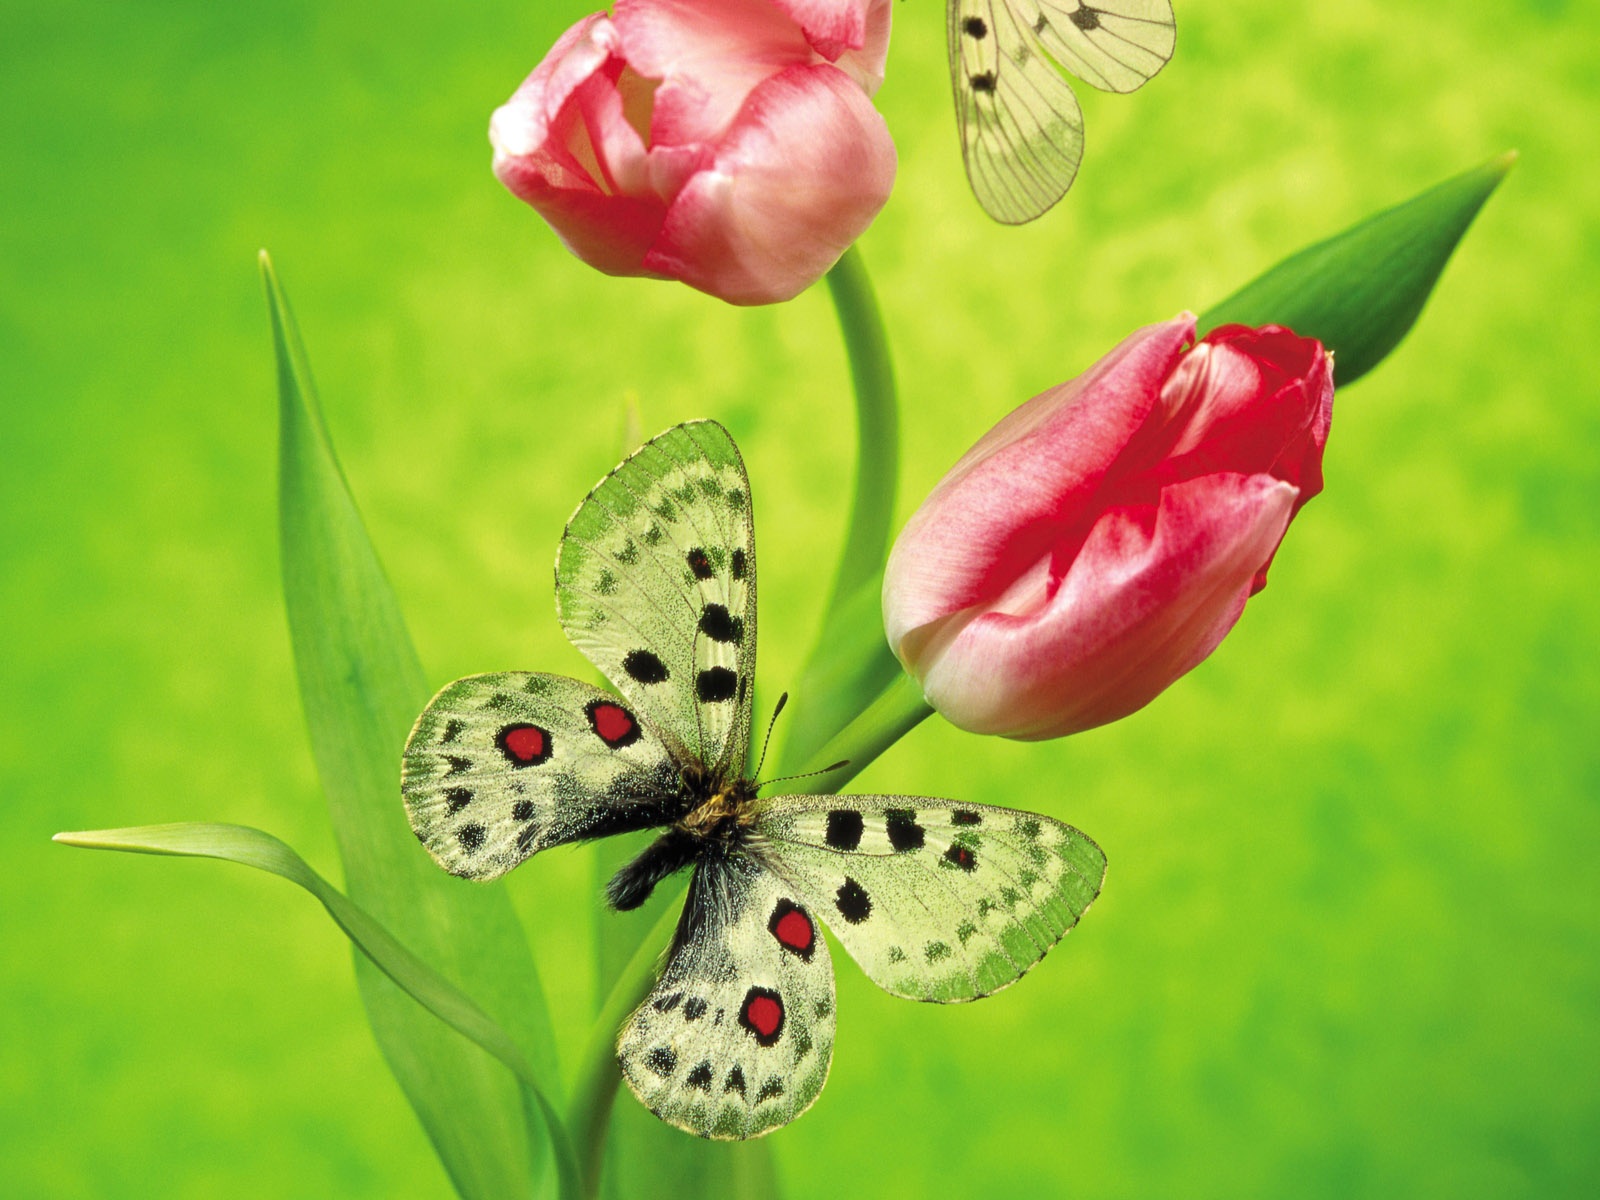 Butterfly on a tulip Wallpapers | HD Wallpapers | ID #5643